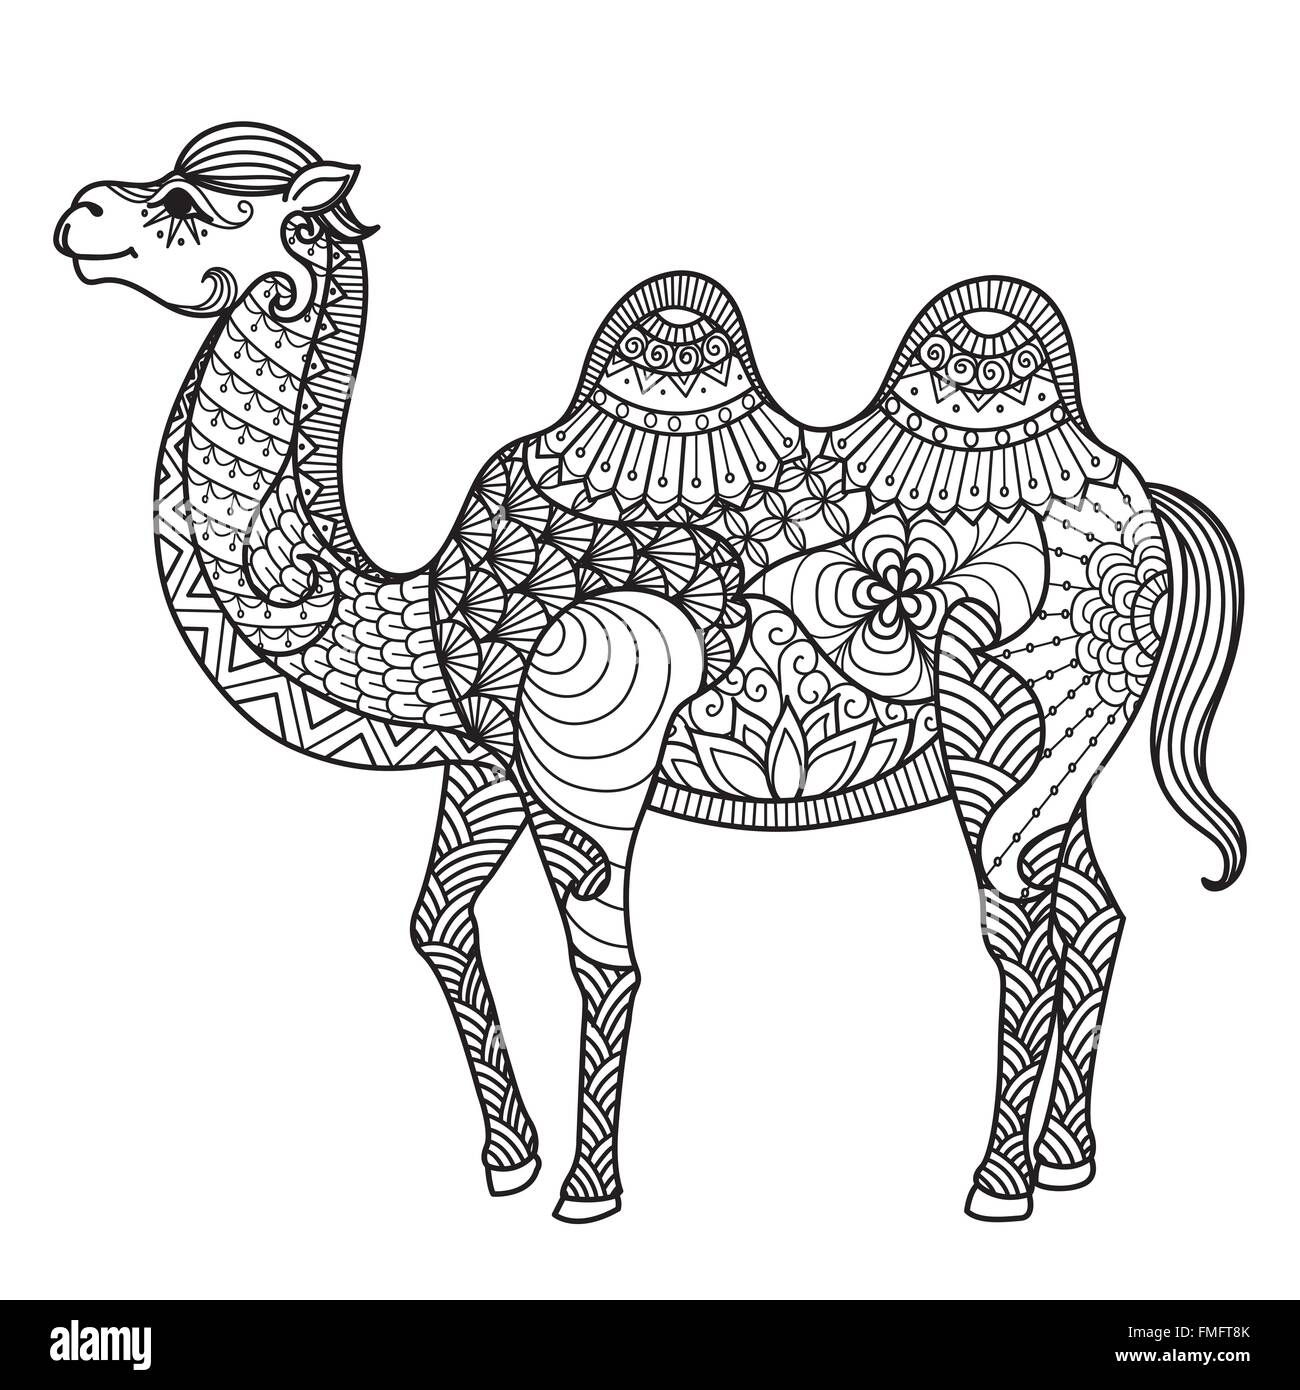 Zentangle camel design for coloring book for adult or other decorations Stock Vector